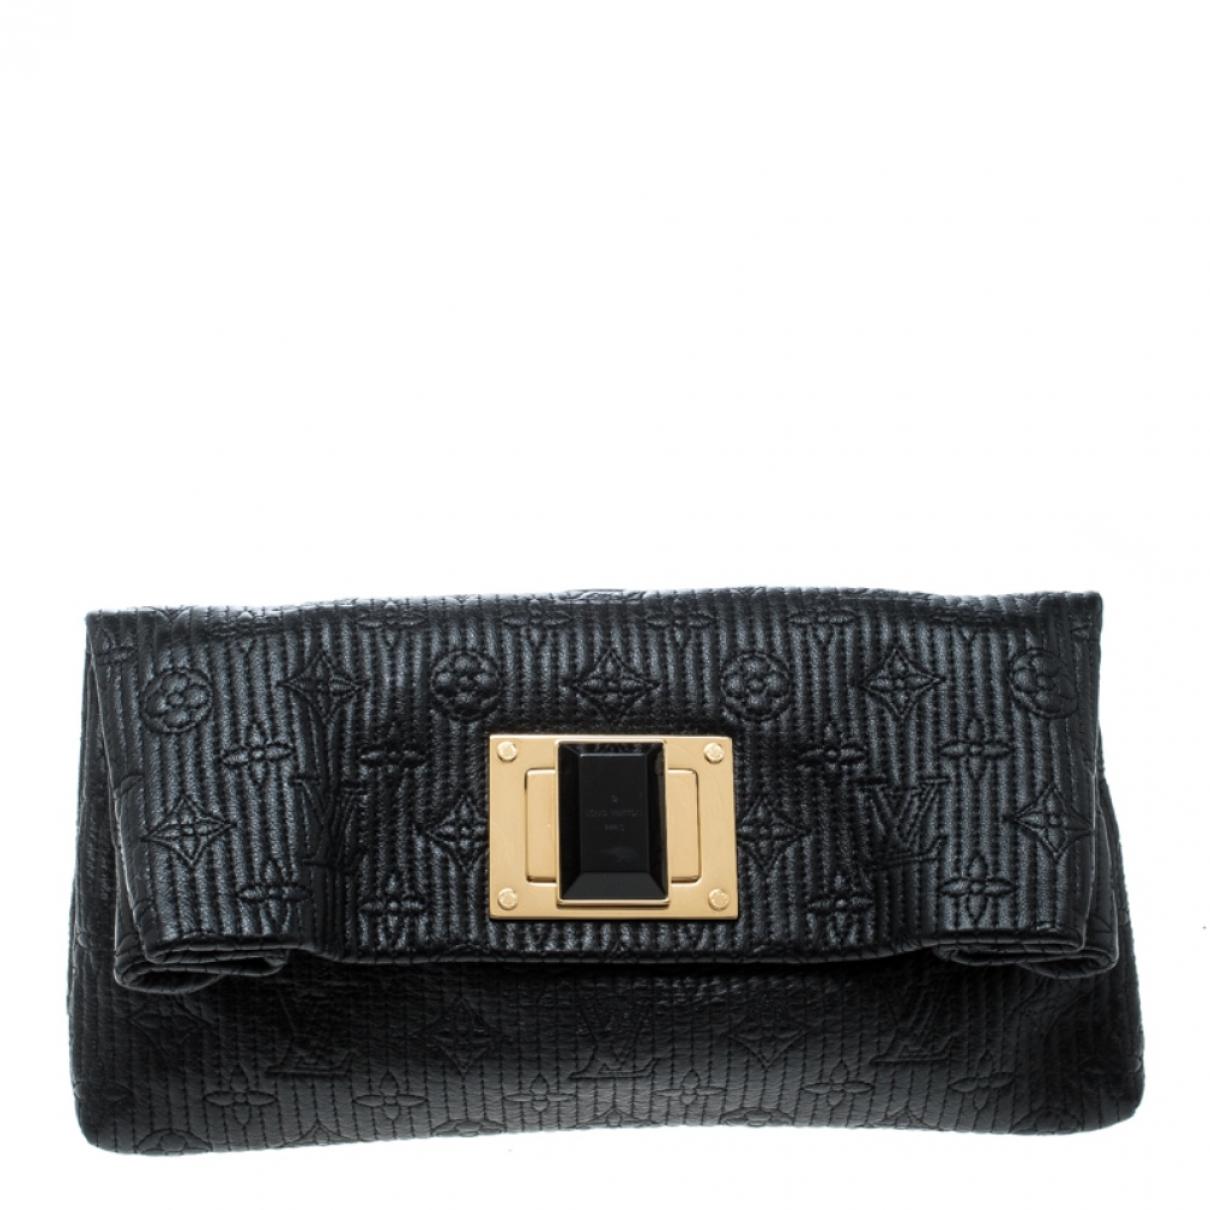 Lyst - Louis Vuitton Leather Clutch Bag in Black - Save 12%